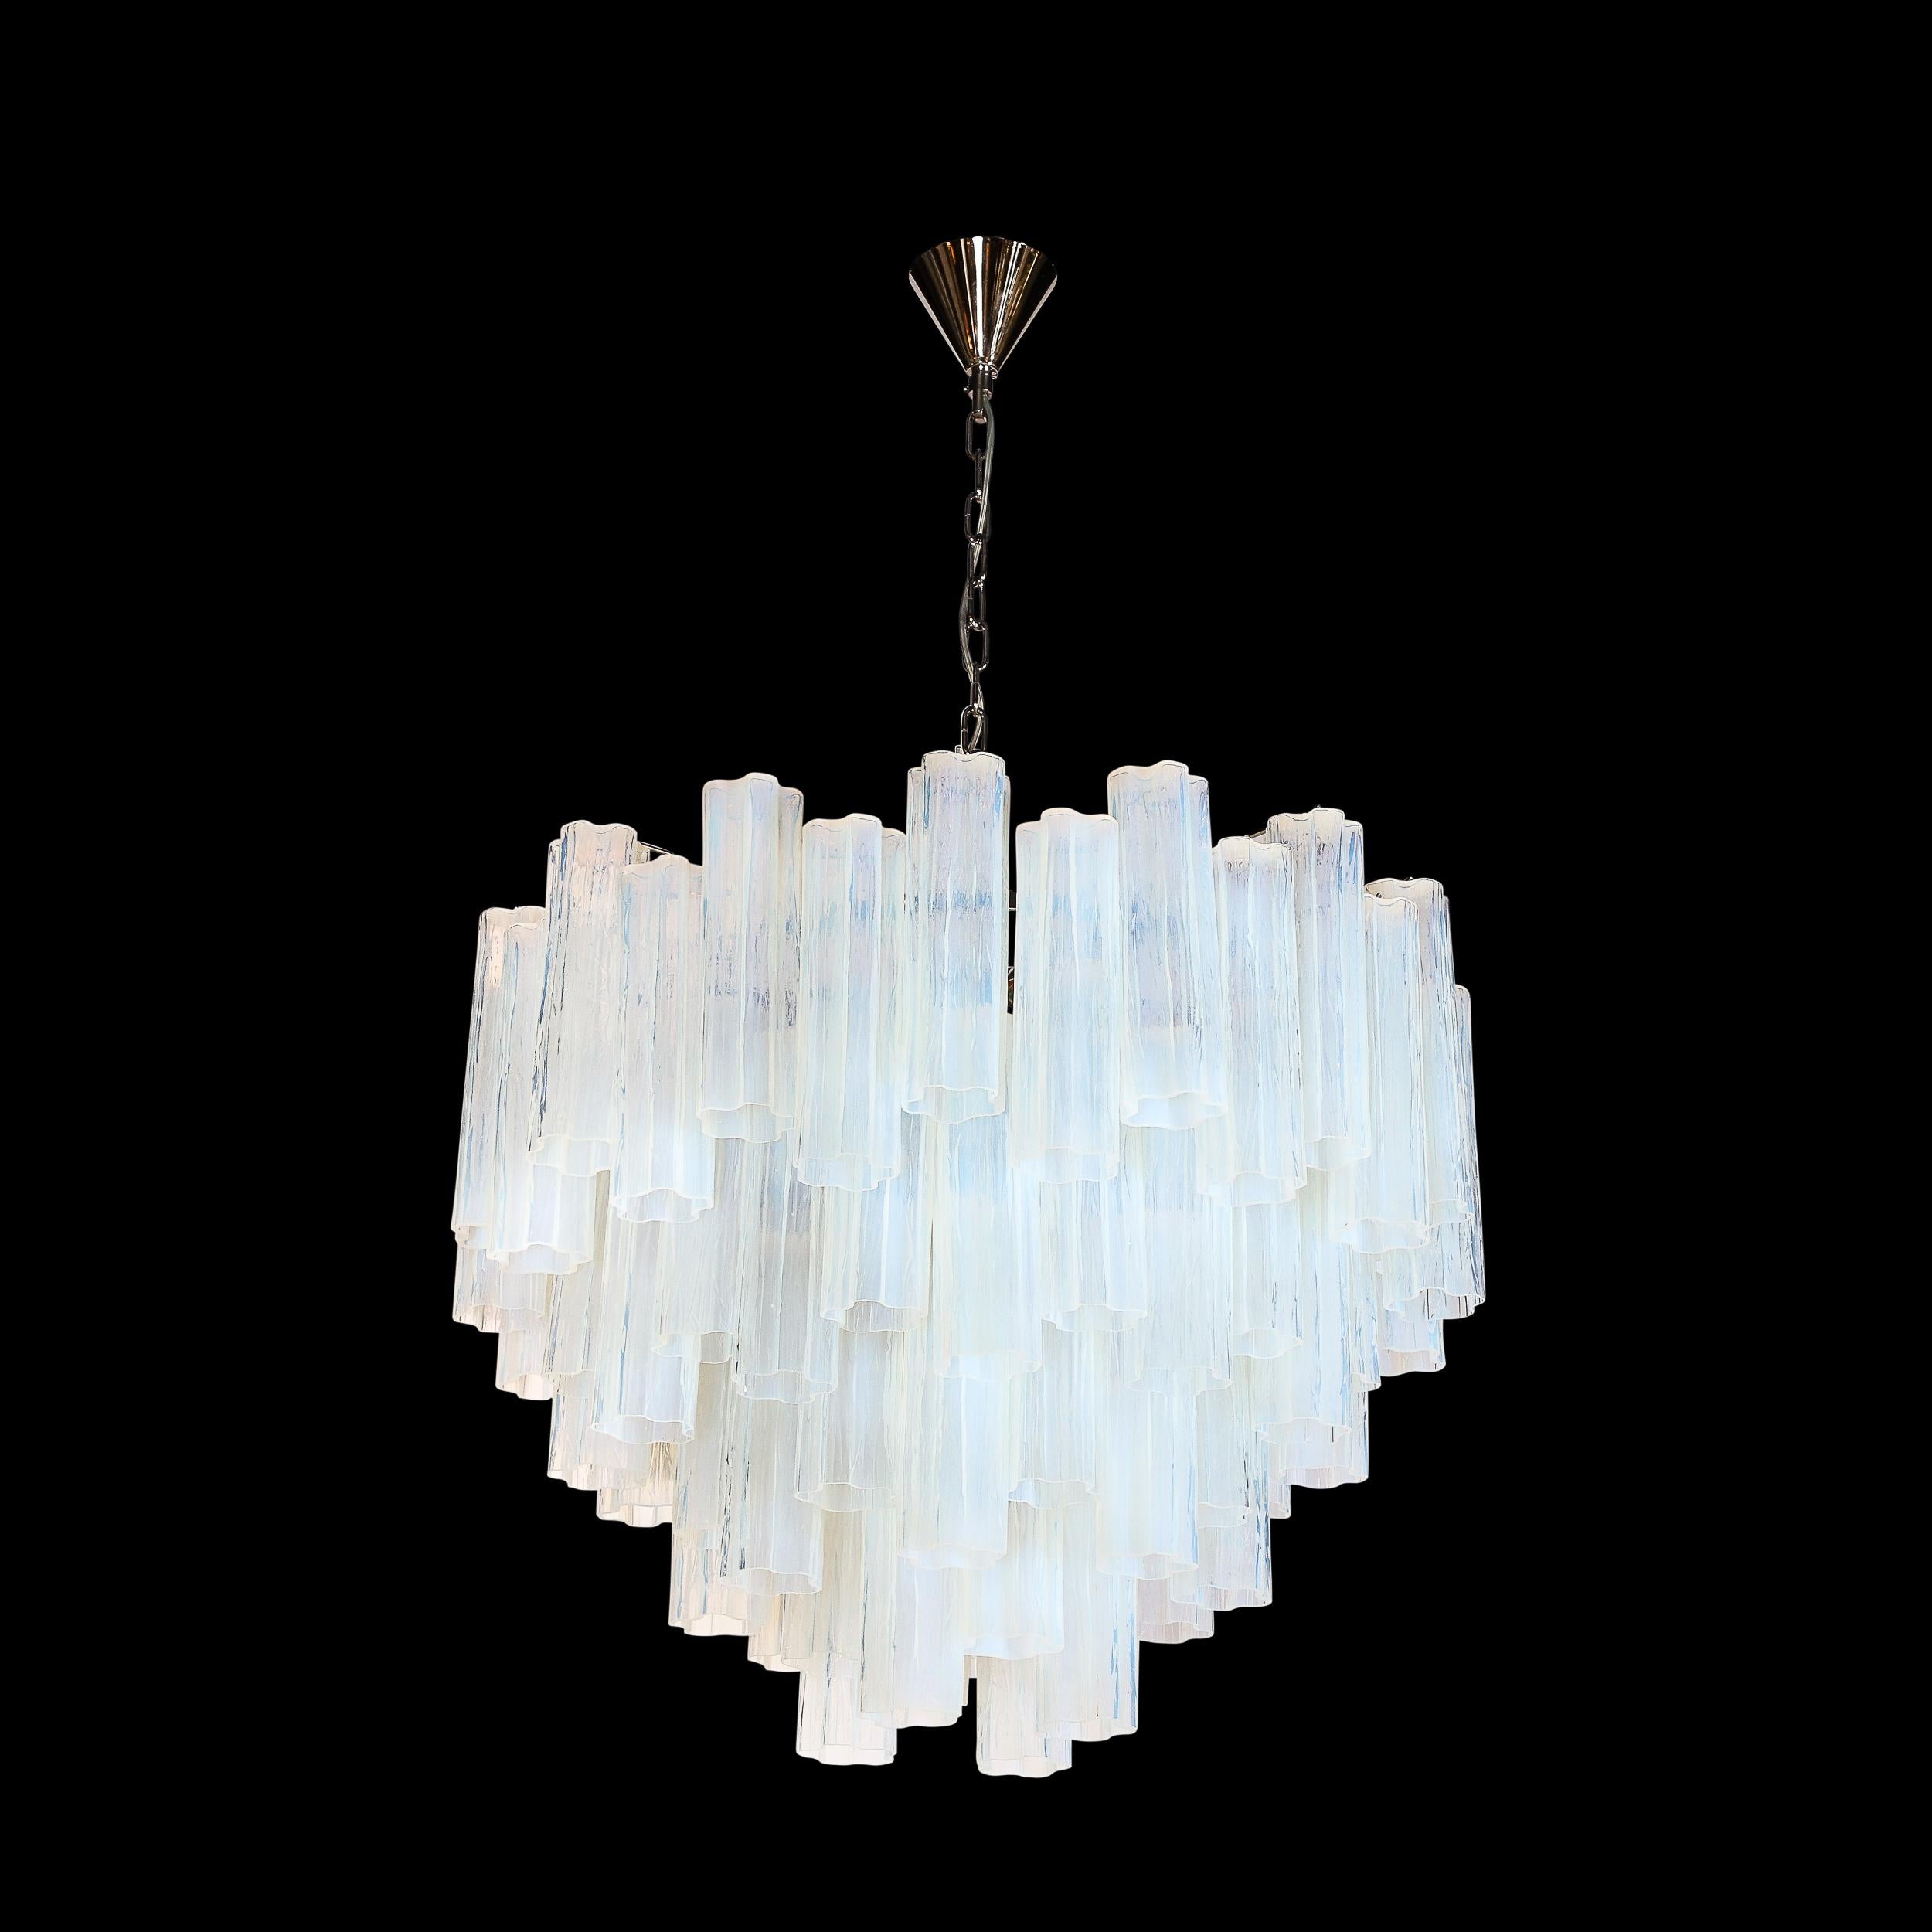 Italian Modernist Hand-Blown Murano Opalescent Four Tiered Tronchi Glass Chandelier For Sale